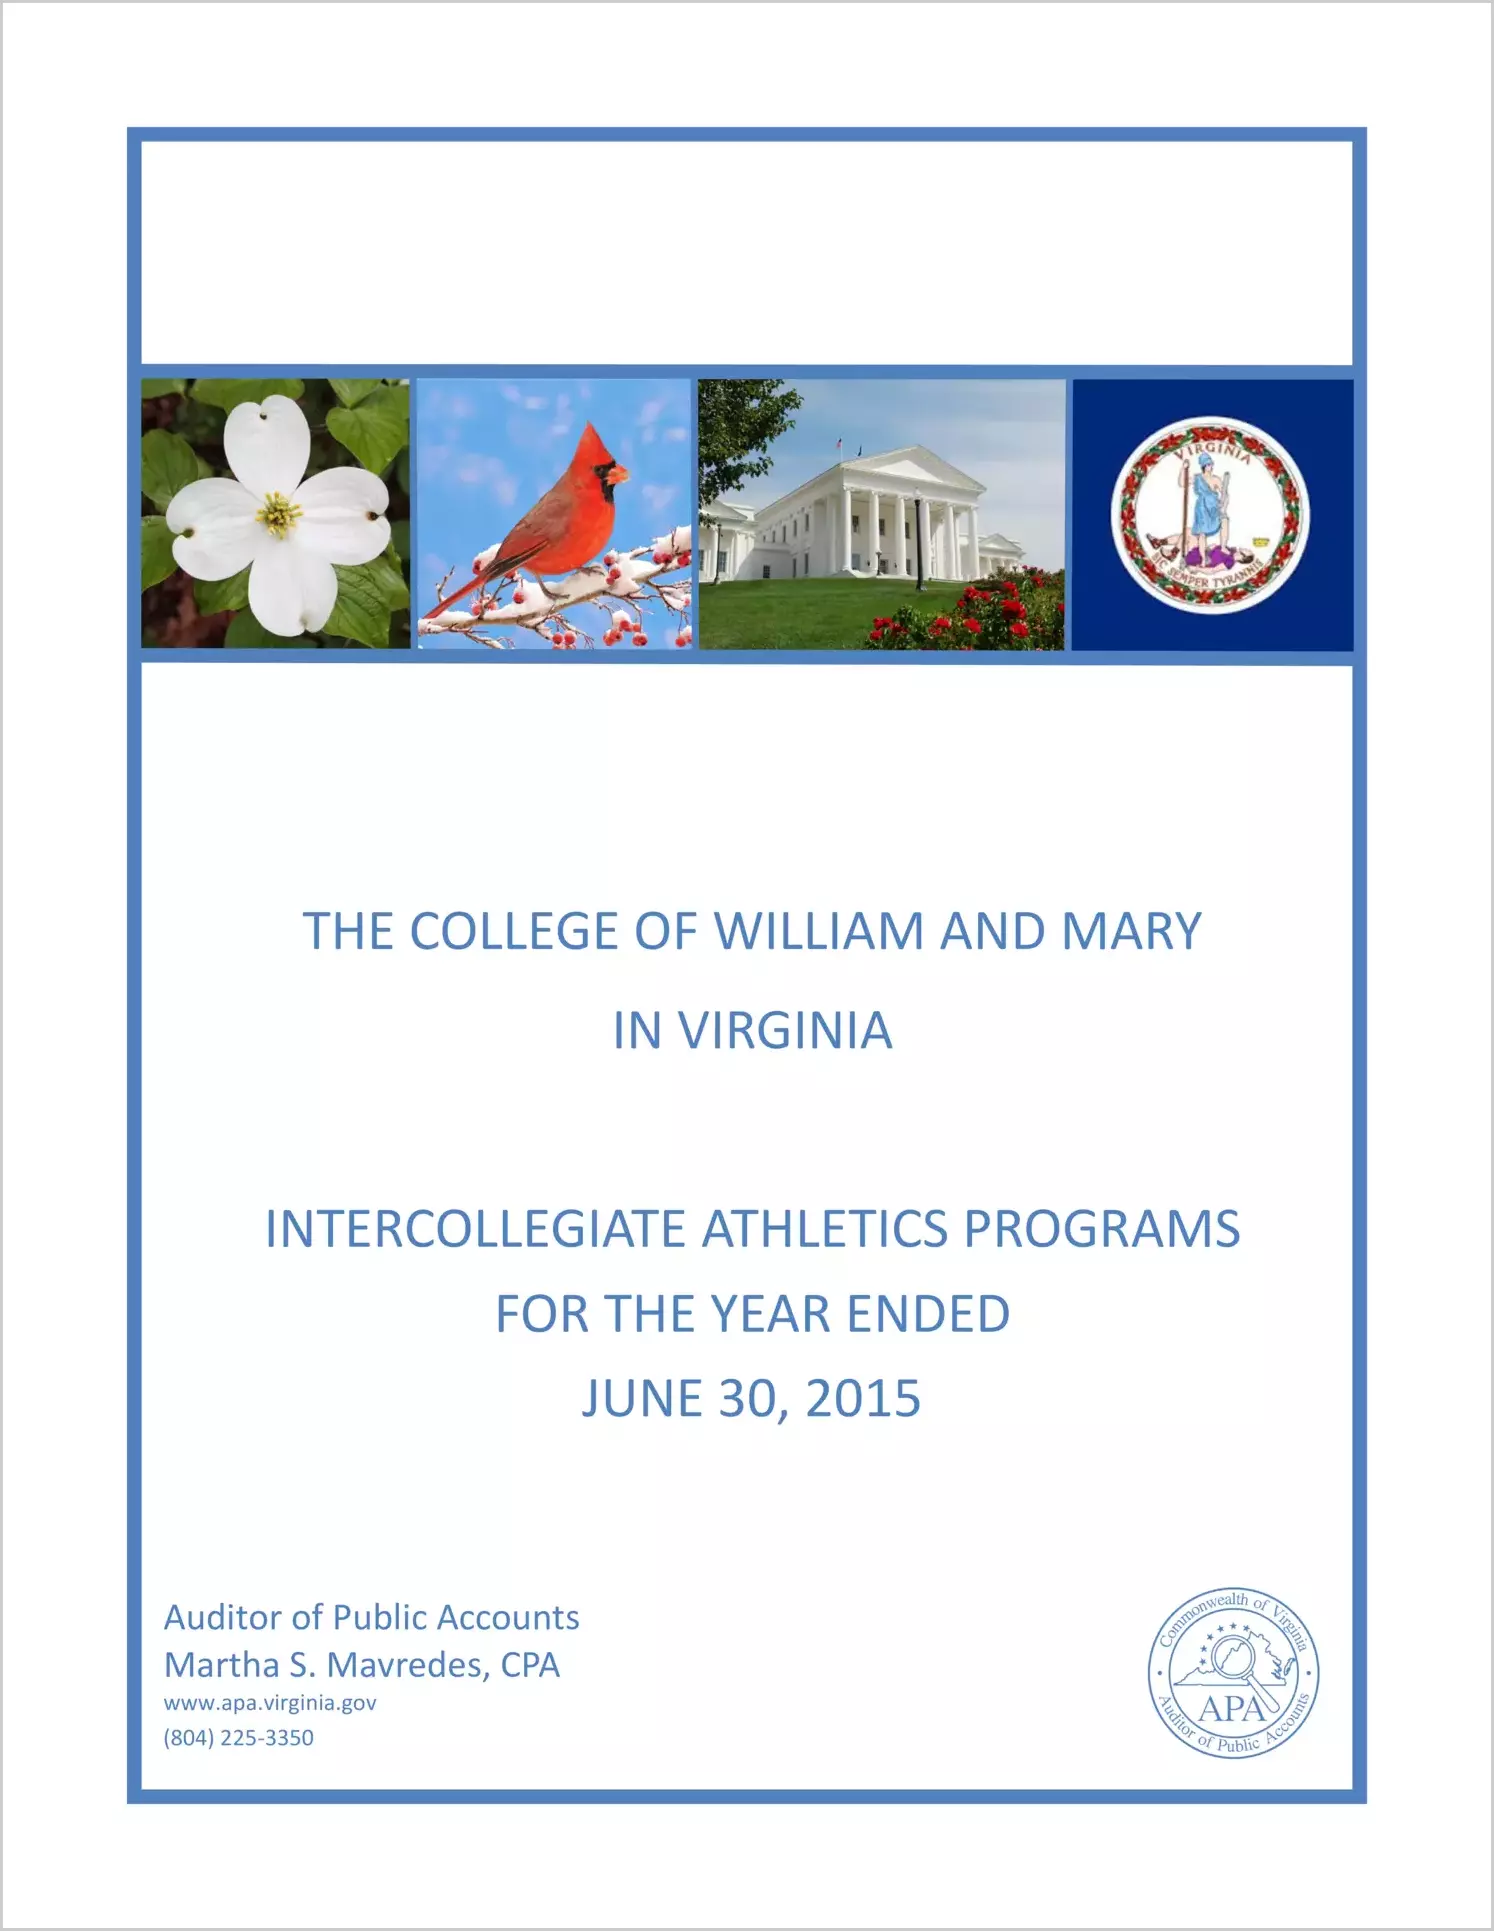 The College of William and Mary in Virginia Intercollegiate Athletics Programs for the year ended June 30, 2015